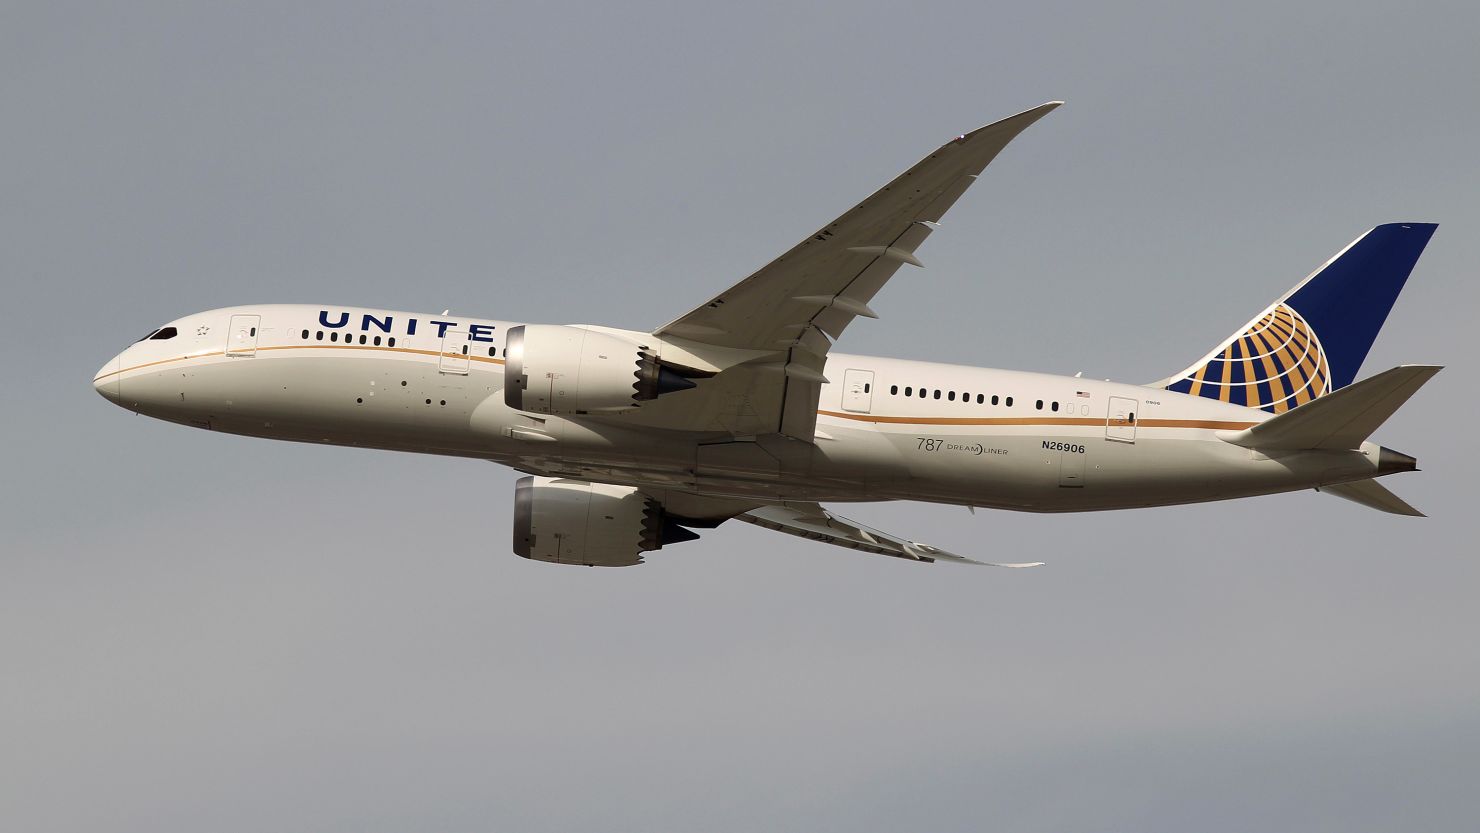 Human error lead to numerous $0 fare (plus tax) tickets being sold on United's U.S. domestic routes.